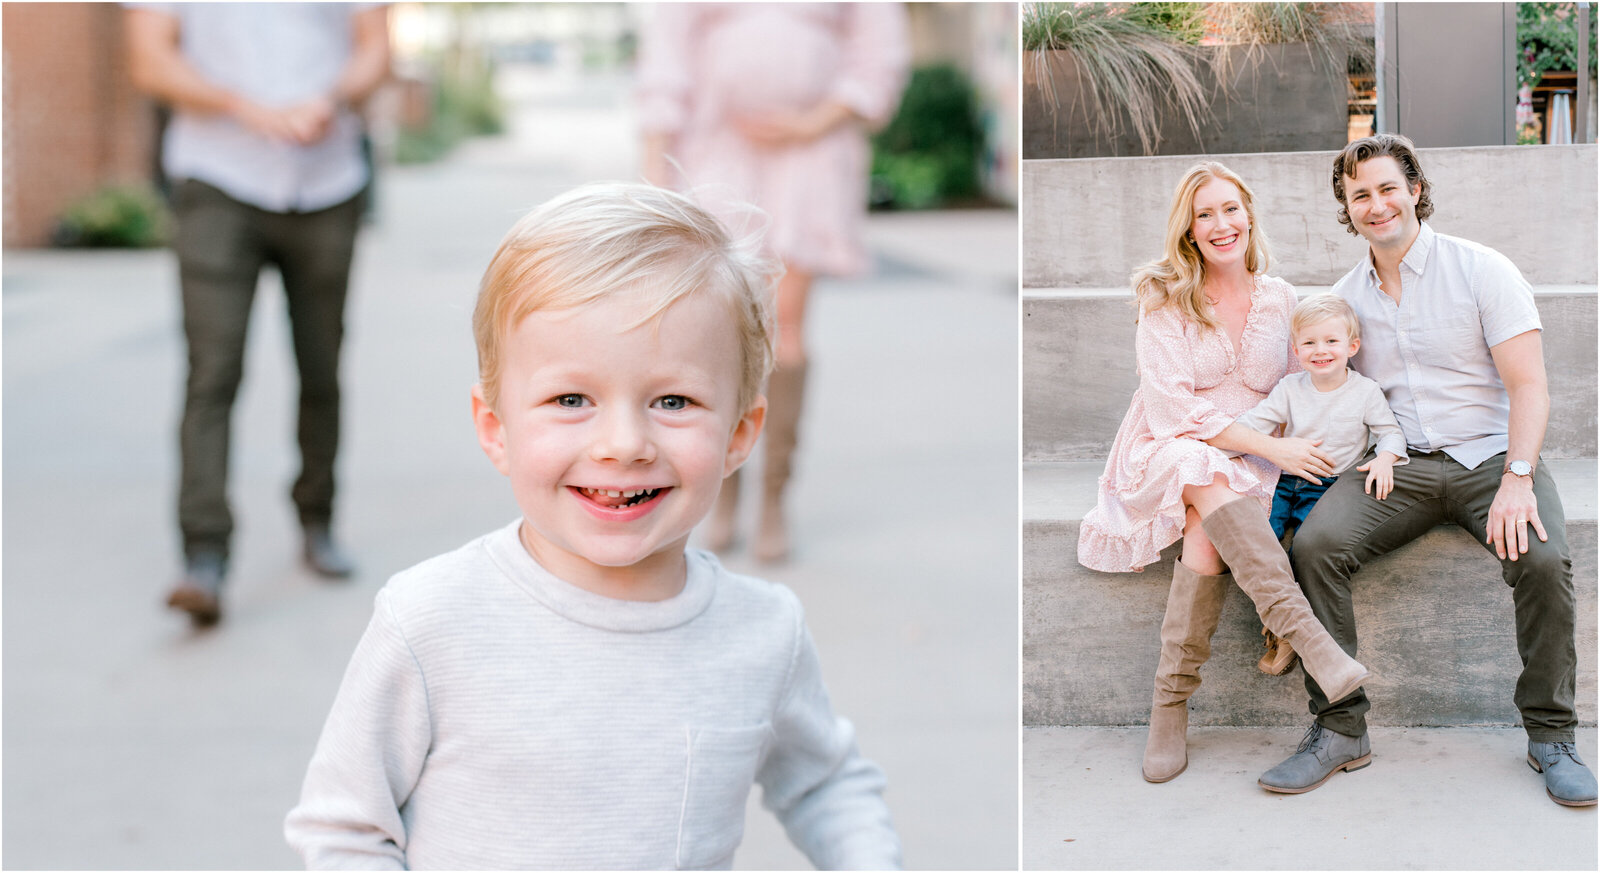 South-End-Family-Session—Uptown-Charlotte-FamilyPhotographer-North-Carolina-Photographer-Alyssa-Frost-Photography-Bright-and-Airy-Photographer-7